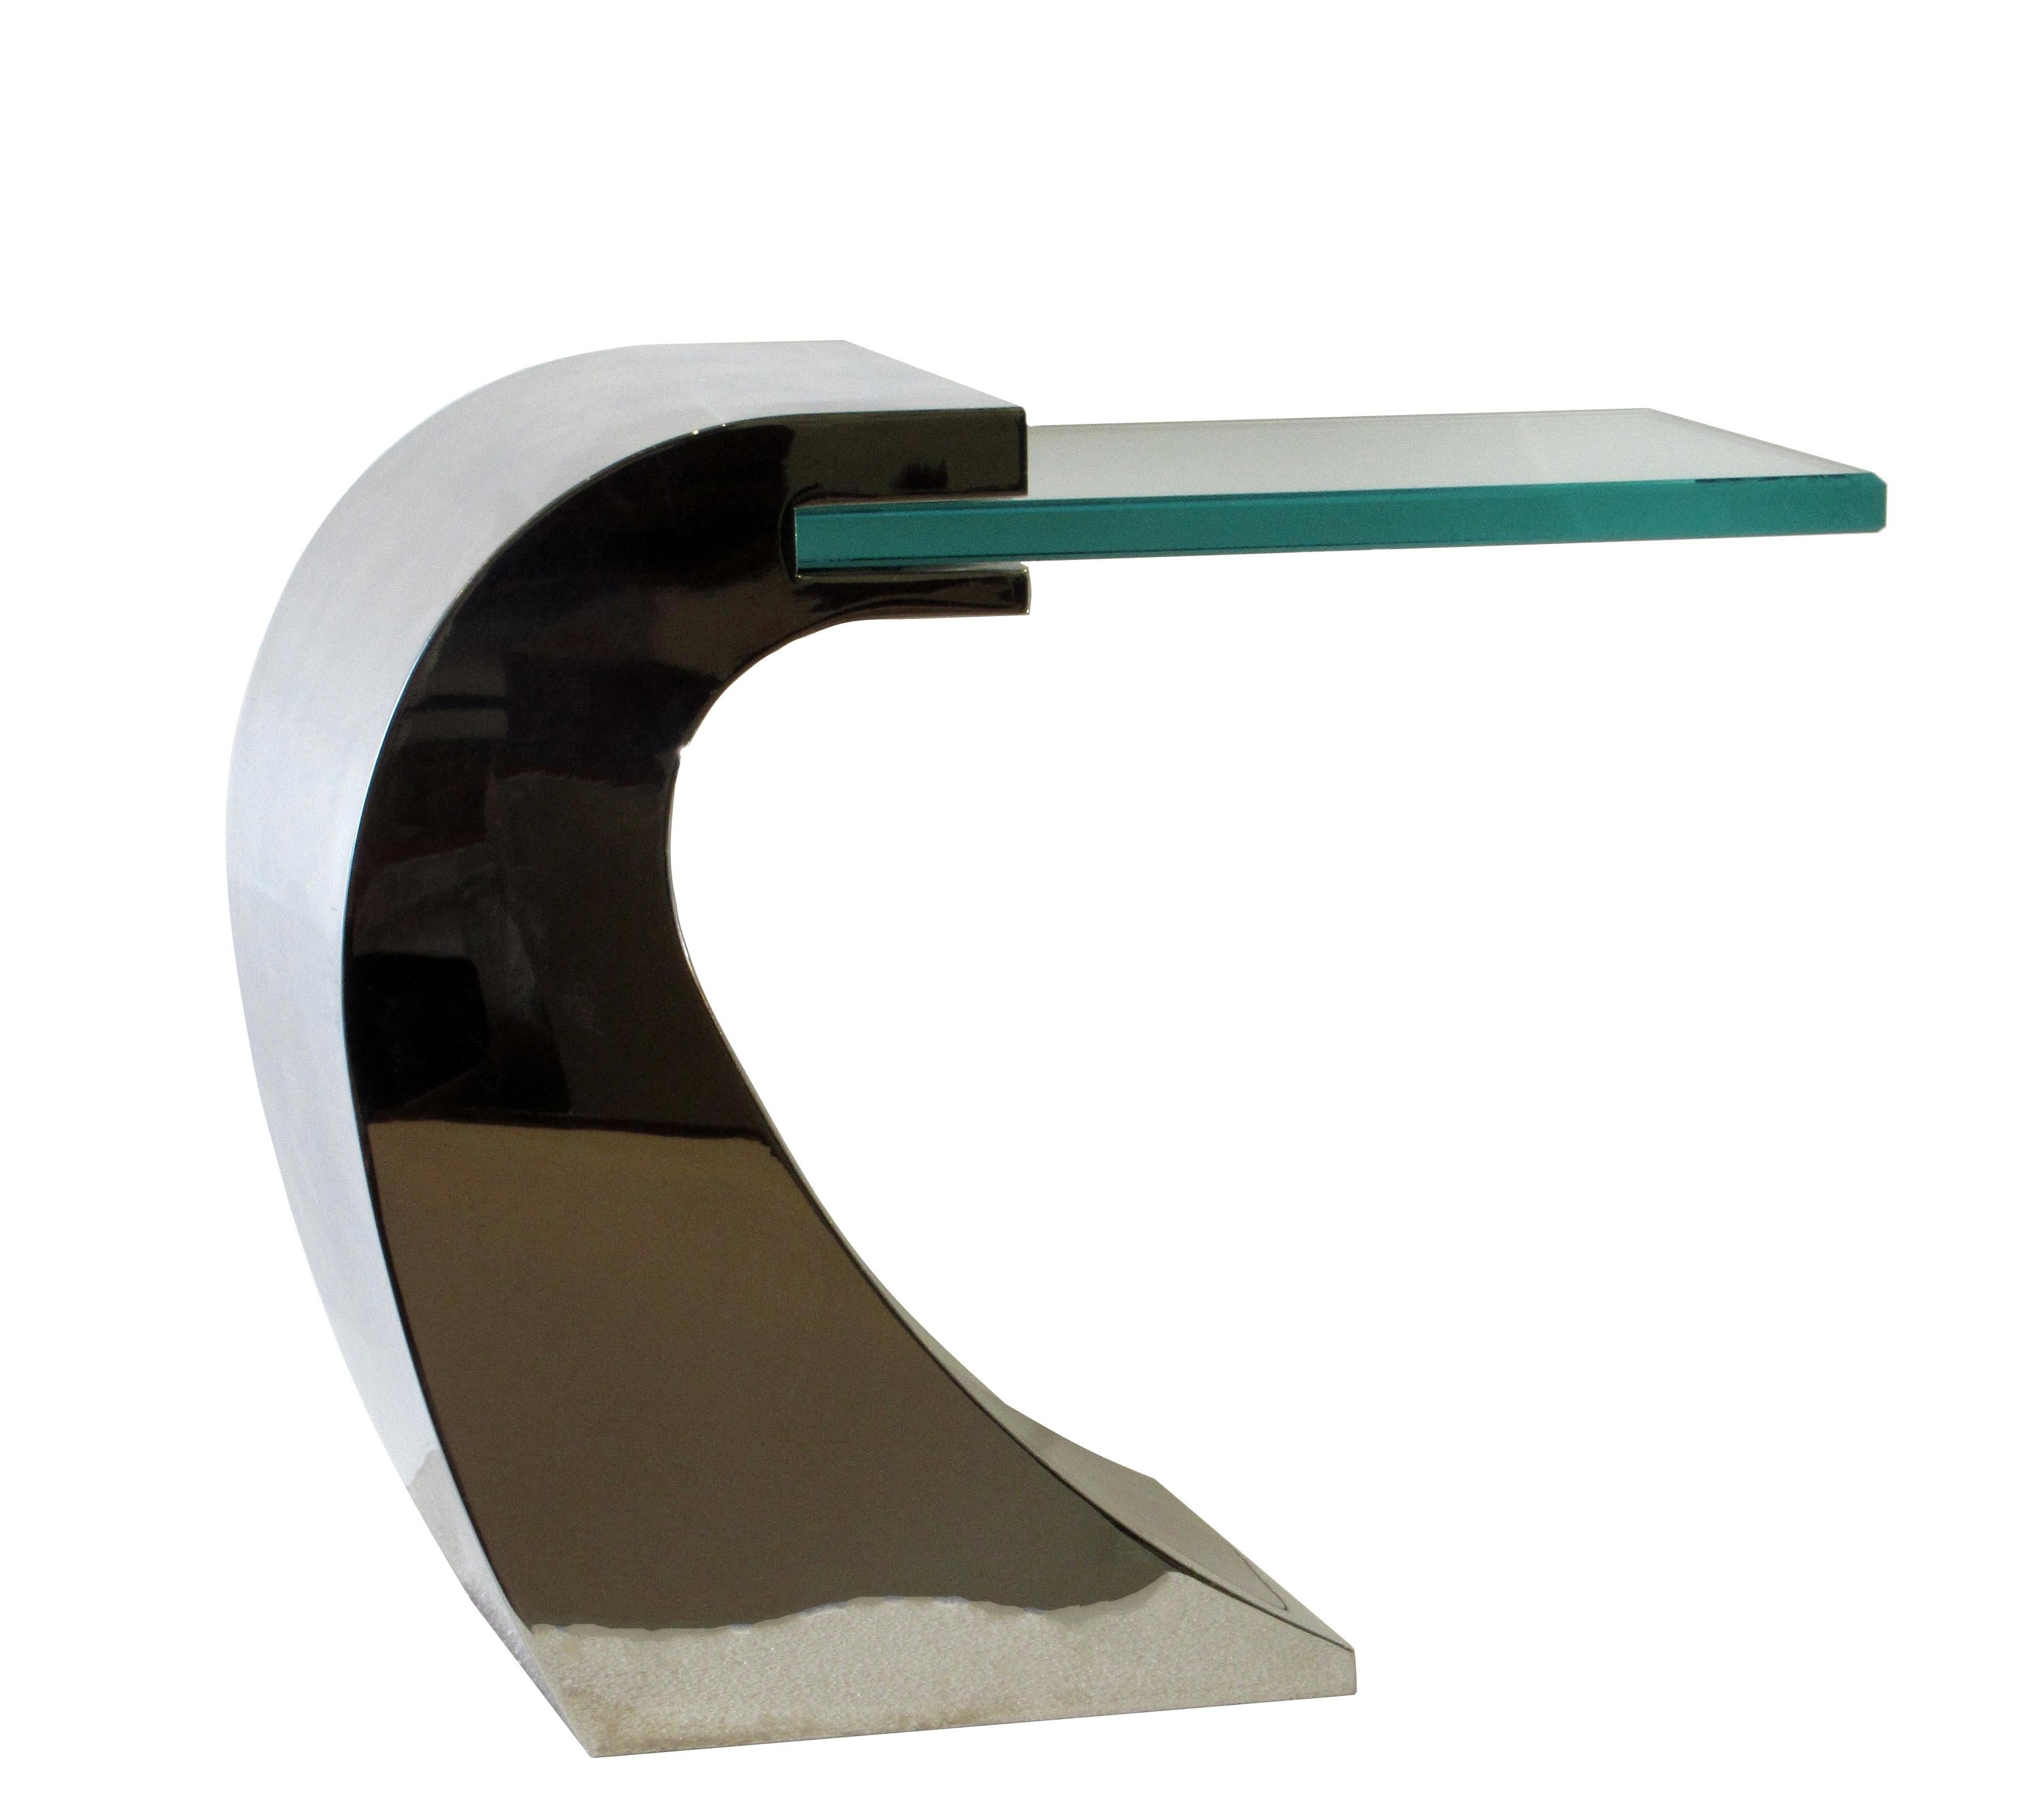 Chrome and glass side table with cantilevered glass inset in a weighted curved polished chrome base.